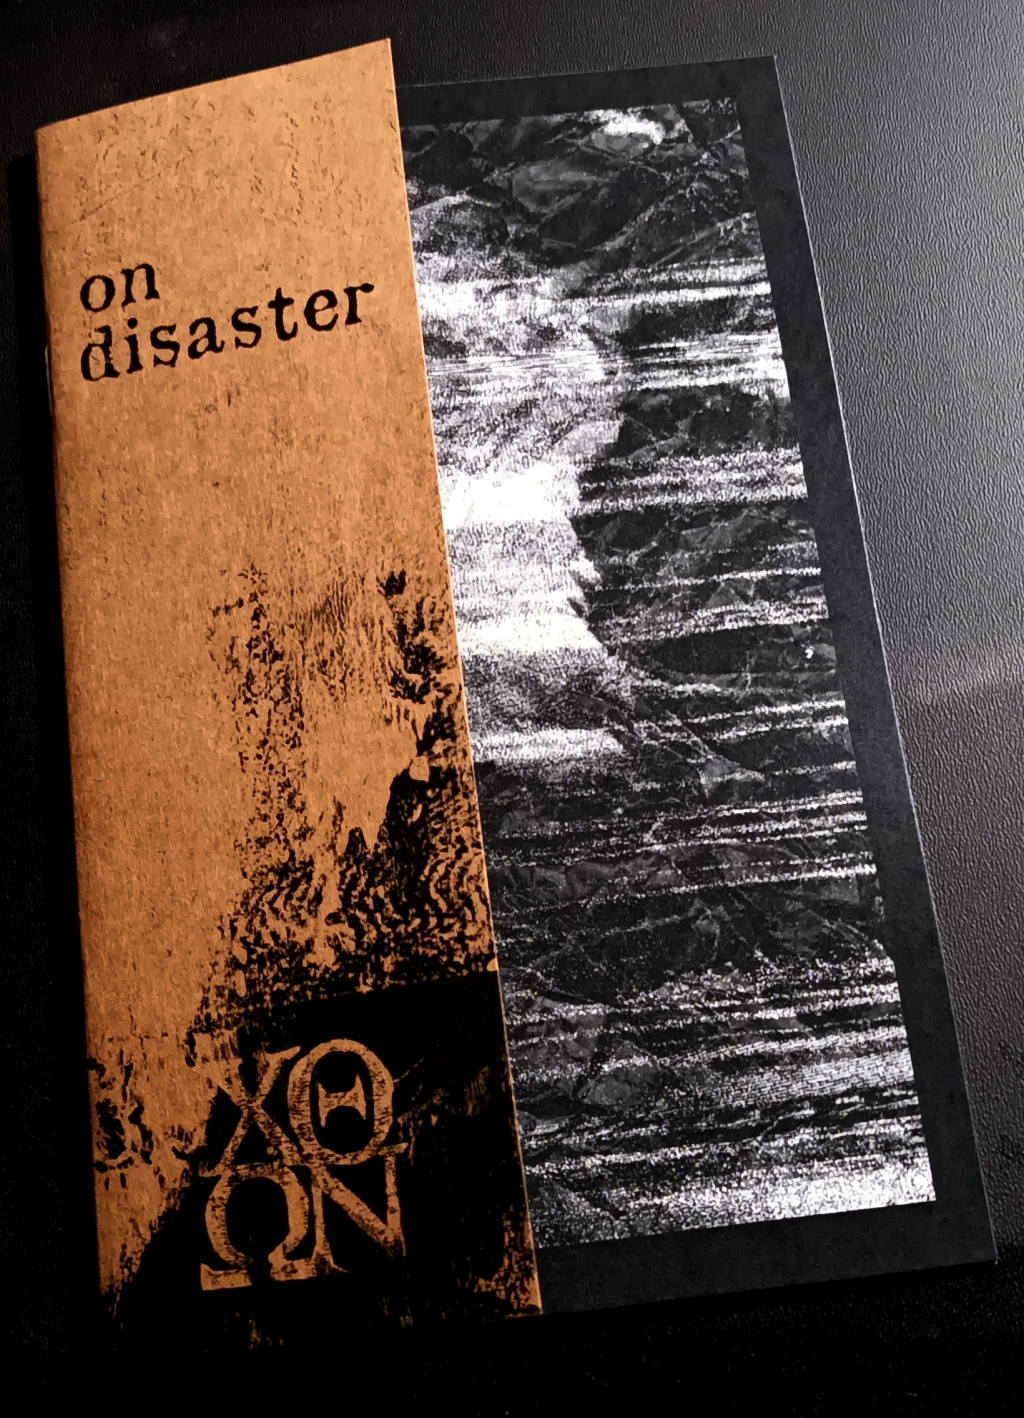 “On Disaster” – out now